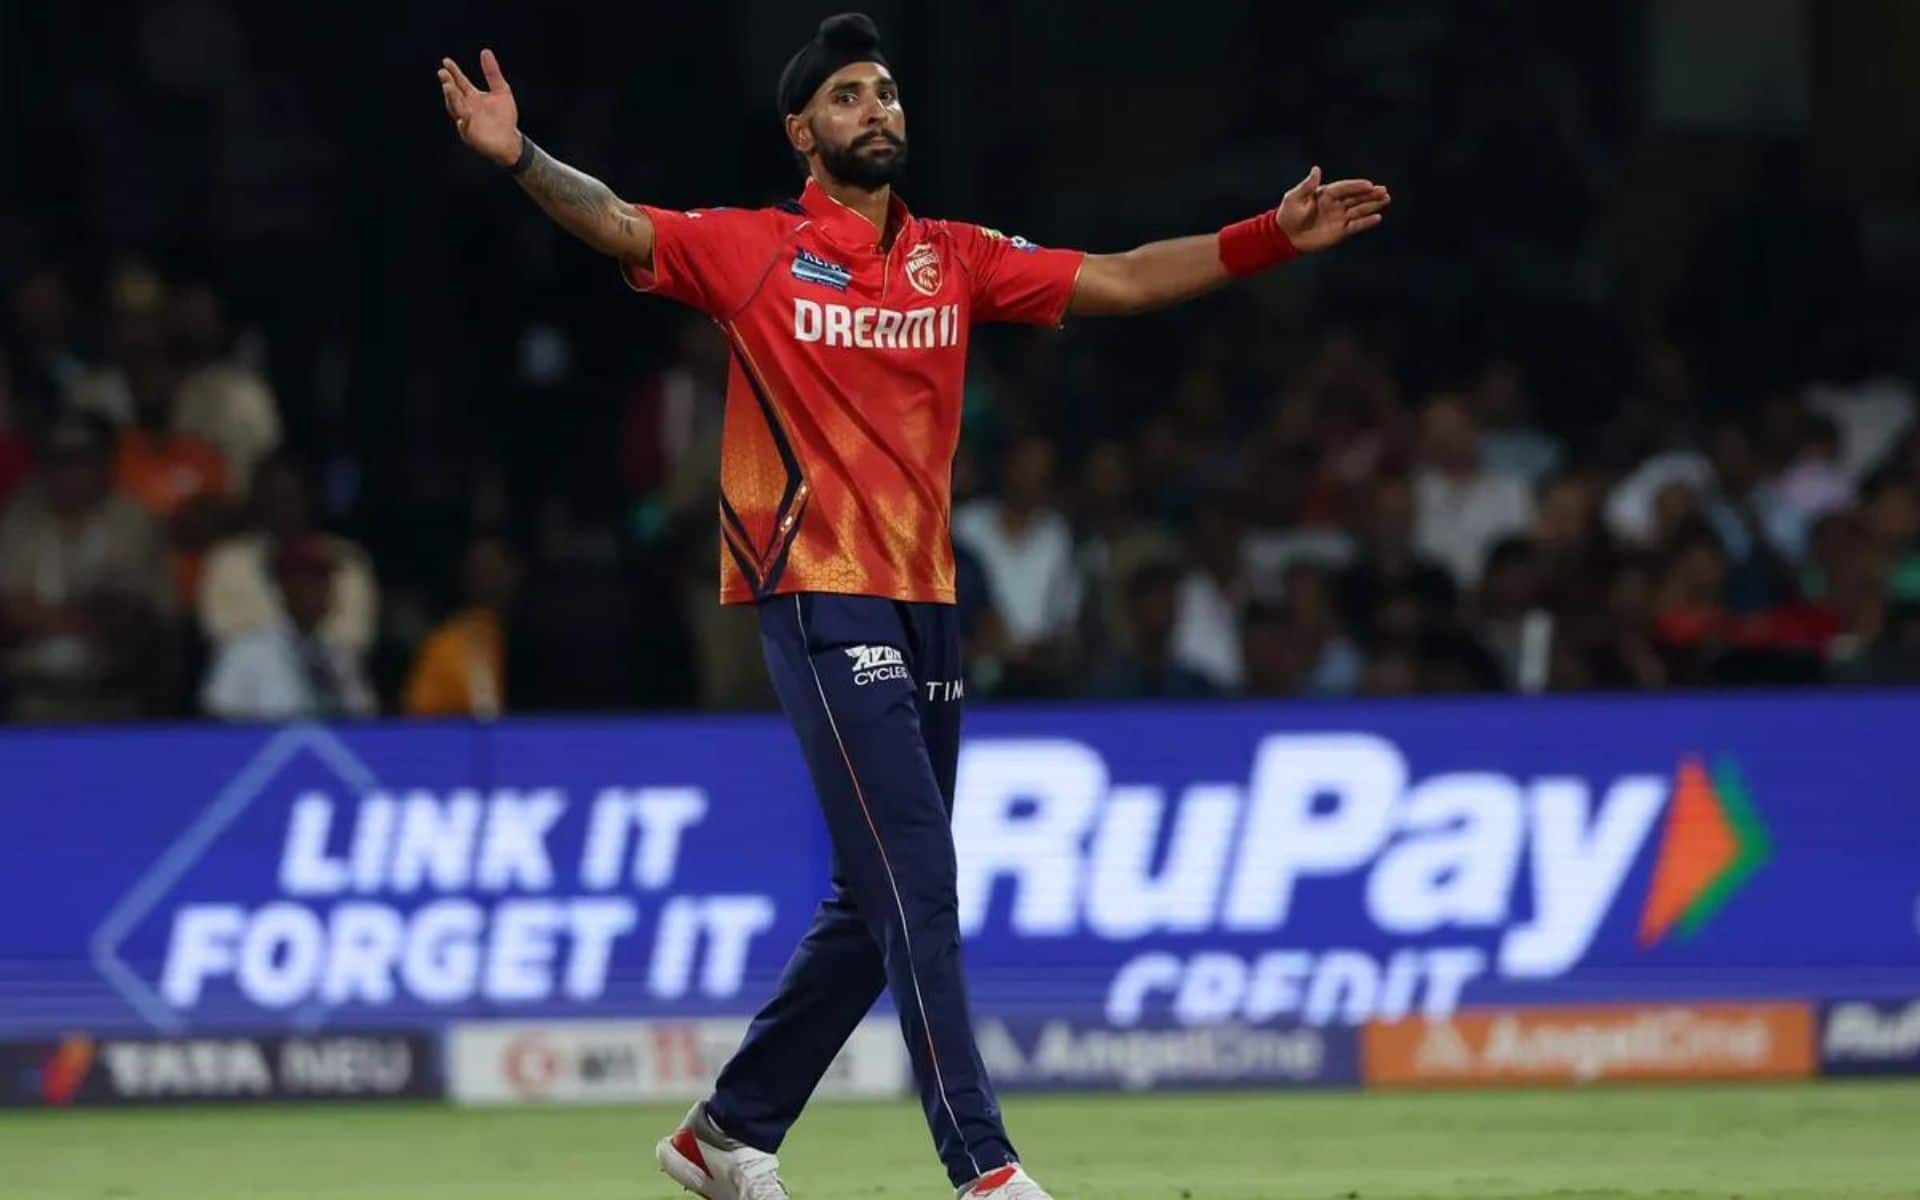 Harpreet Brar will be an important player for the PBKS in the match [iplt20.com